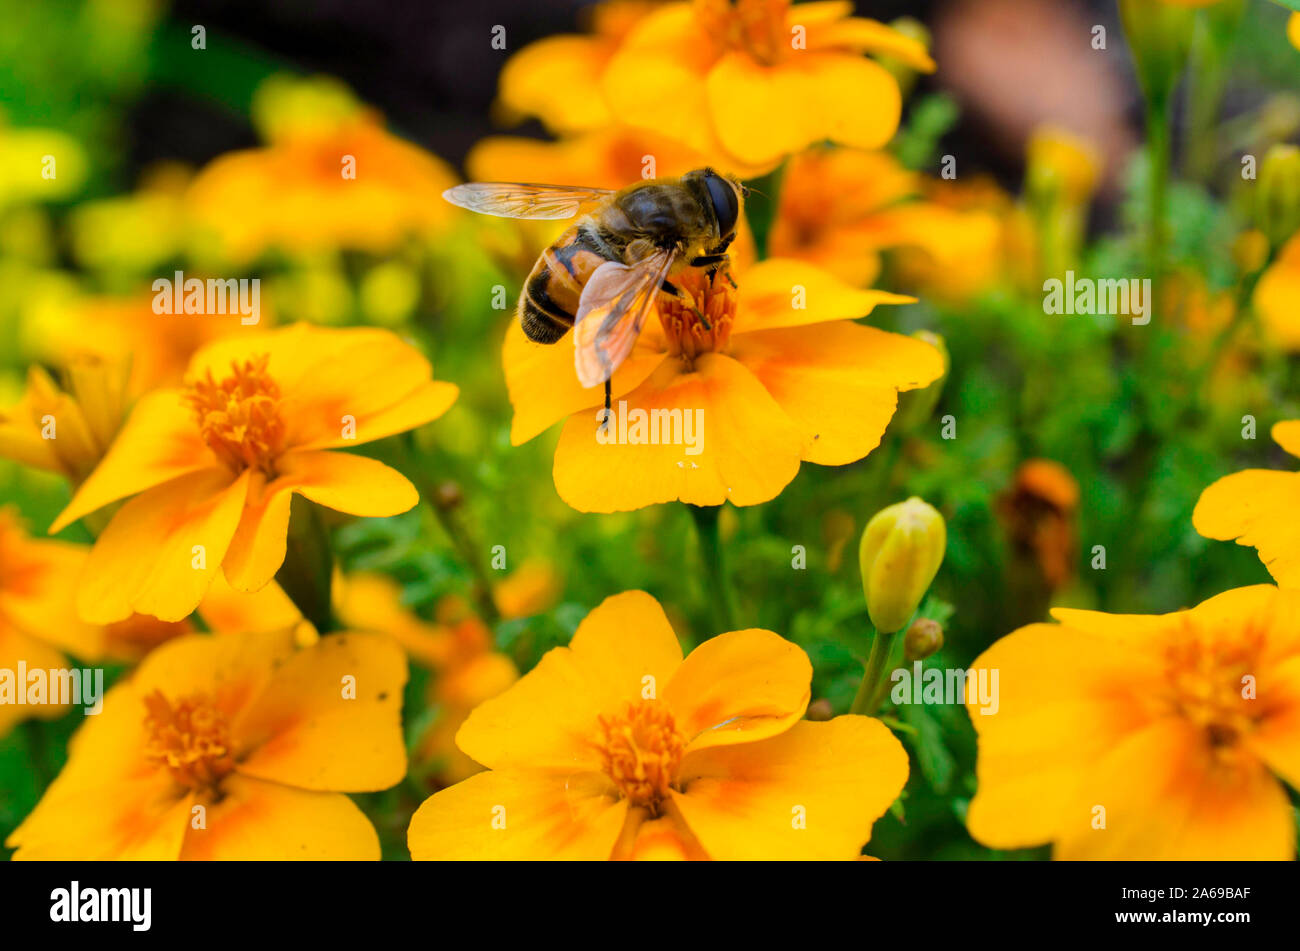 Single bee on a yellow flower surrounded by multiple yellow flowers Stock Photo